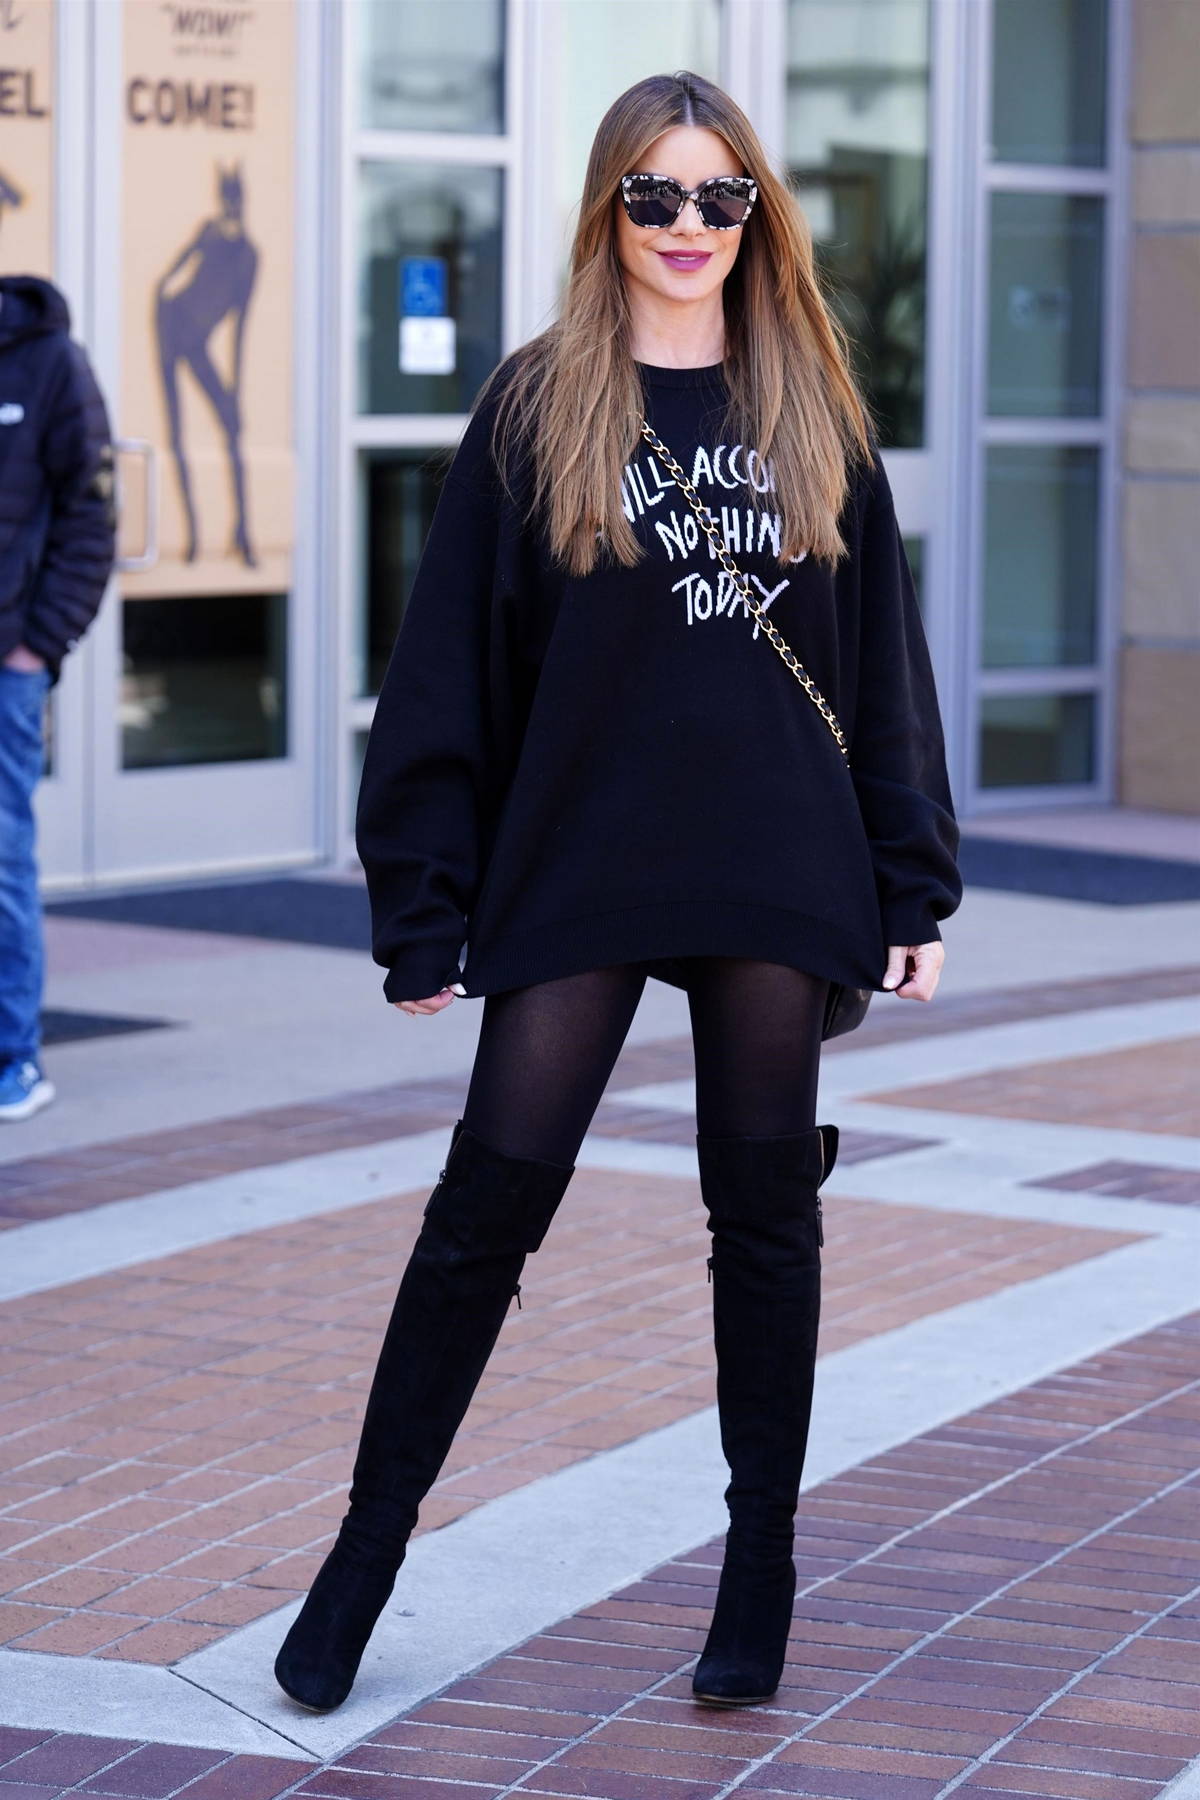 Sofia Vergara rocks an oversized black sweater with matching tights and  boots as she arrives at